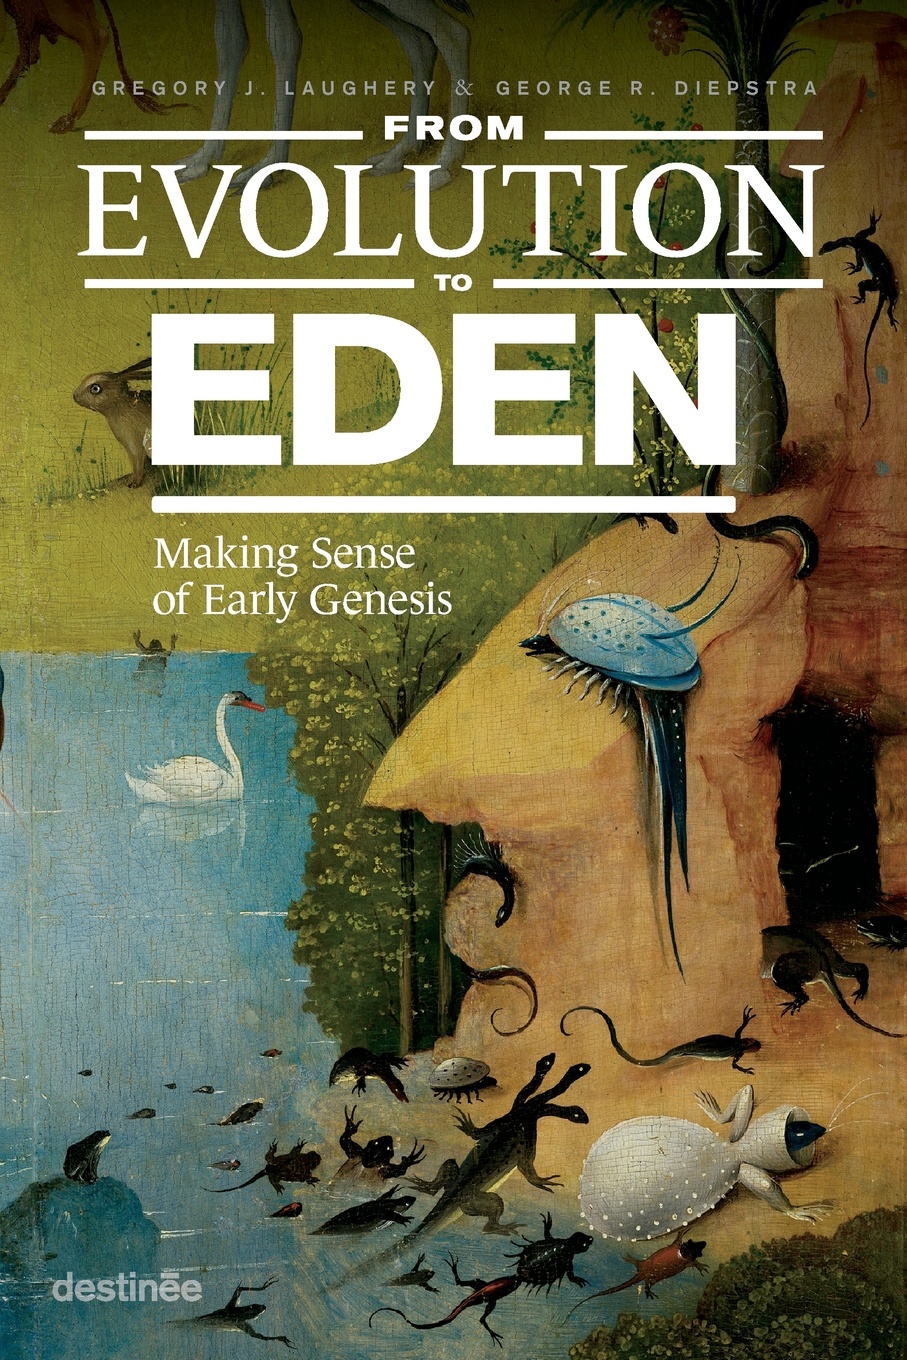 From Evolution to Eden. Making Sense of Early Genesis